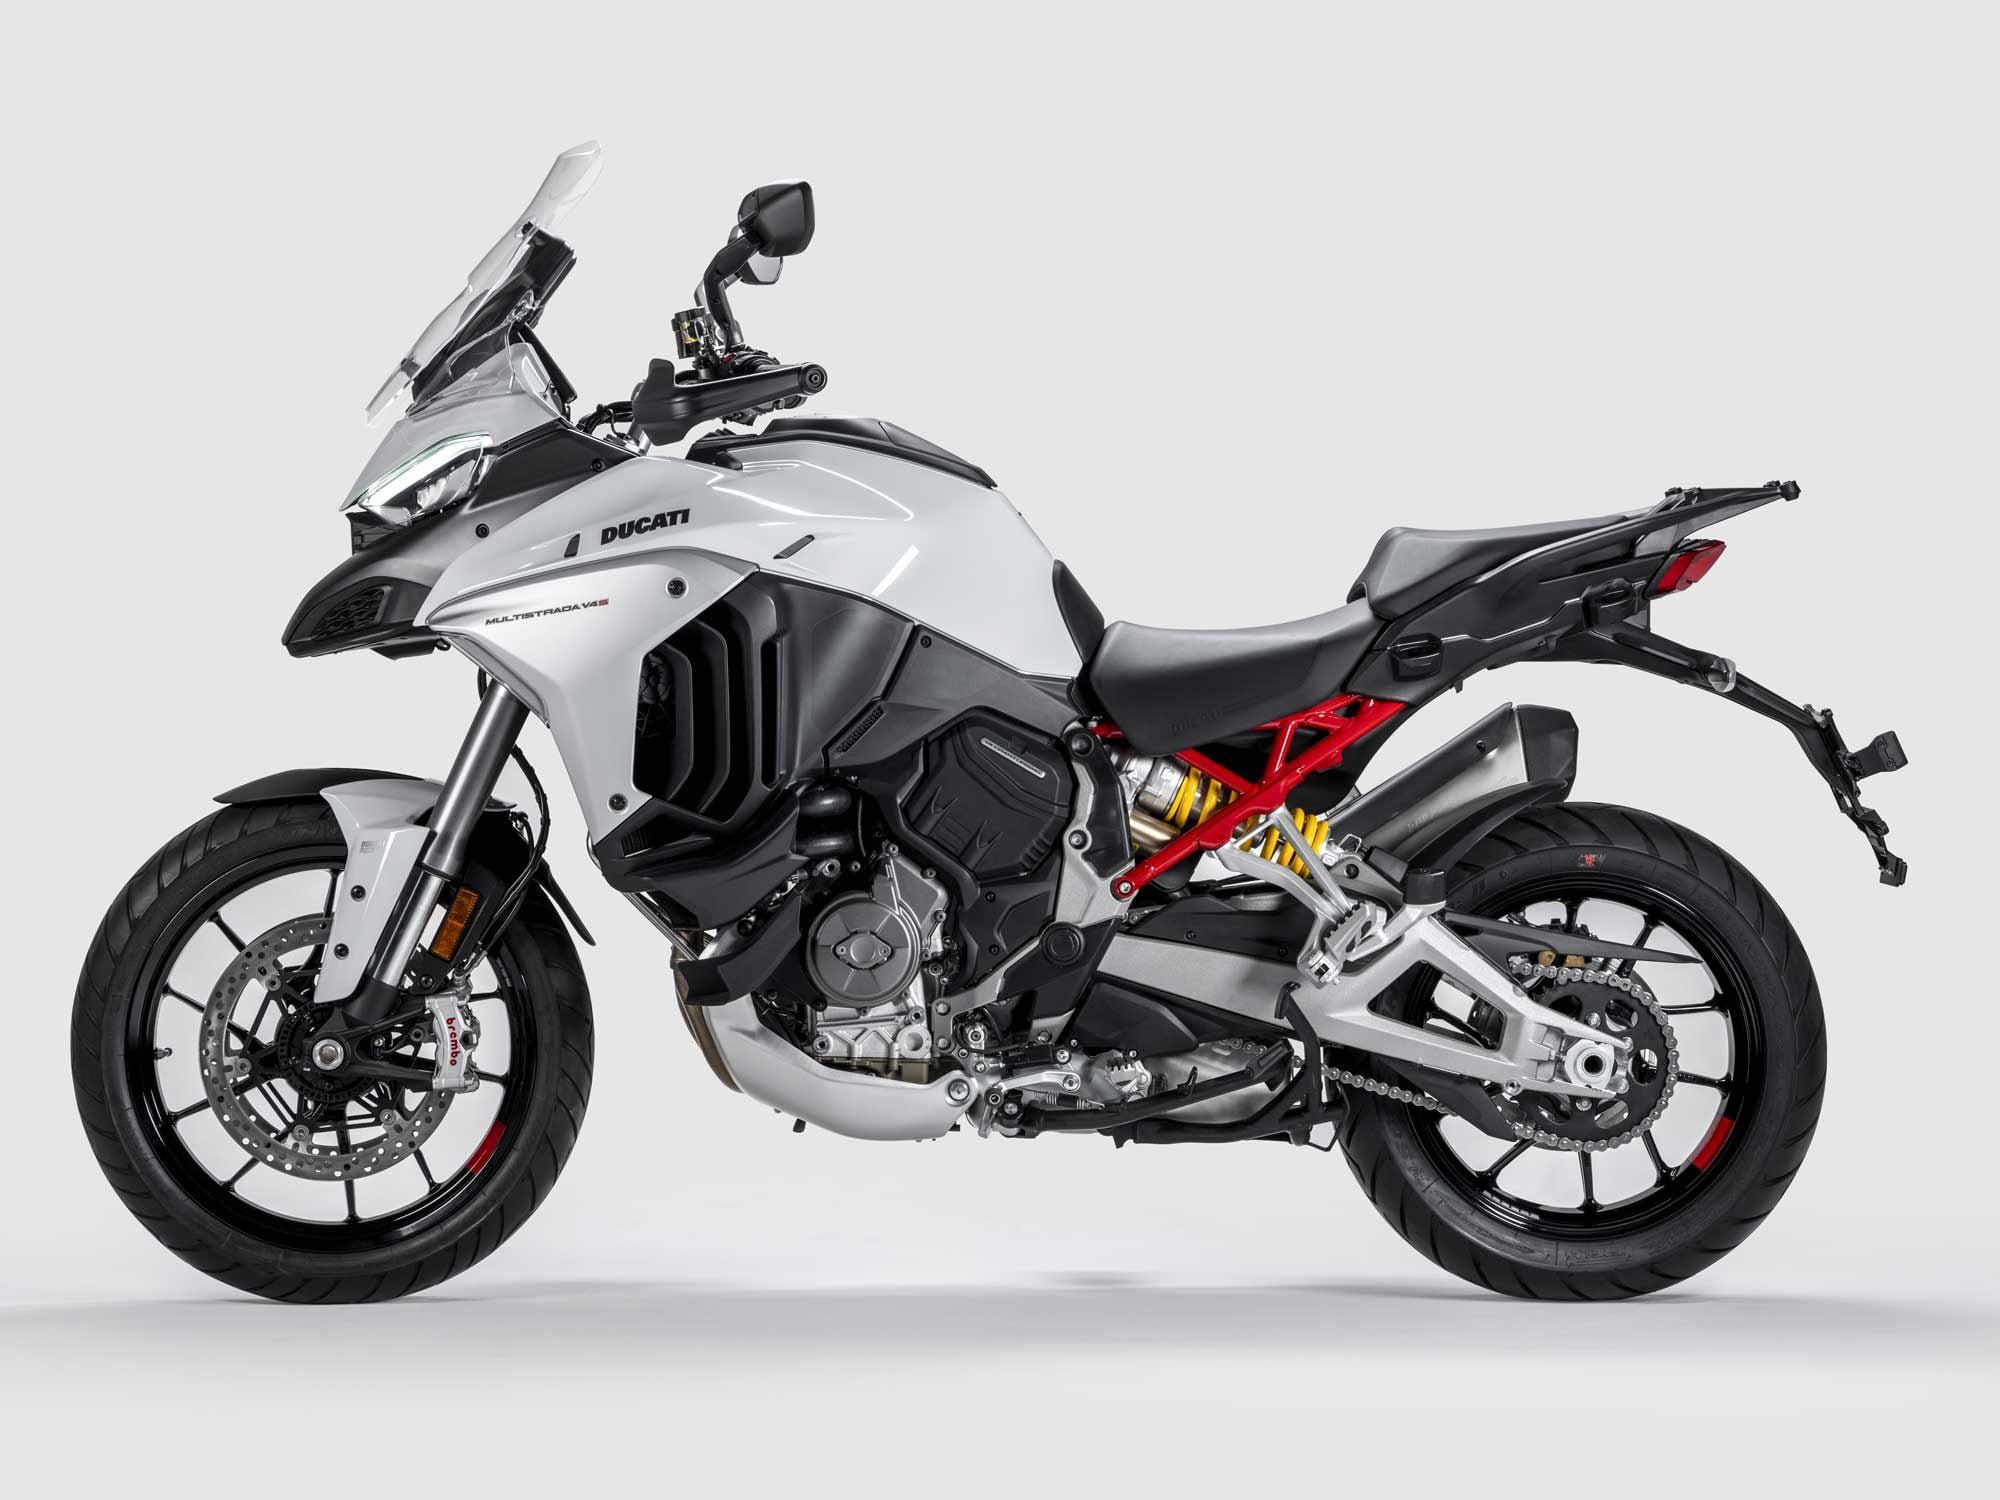 After only a year on the market, the Ducati Multistrada V4 is already getting some updates. Of particular interest, the V4 S gets a new, semi-auto ride-height function